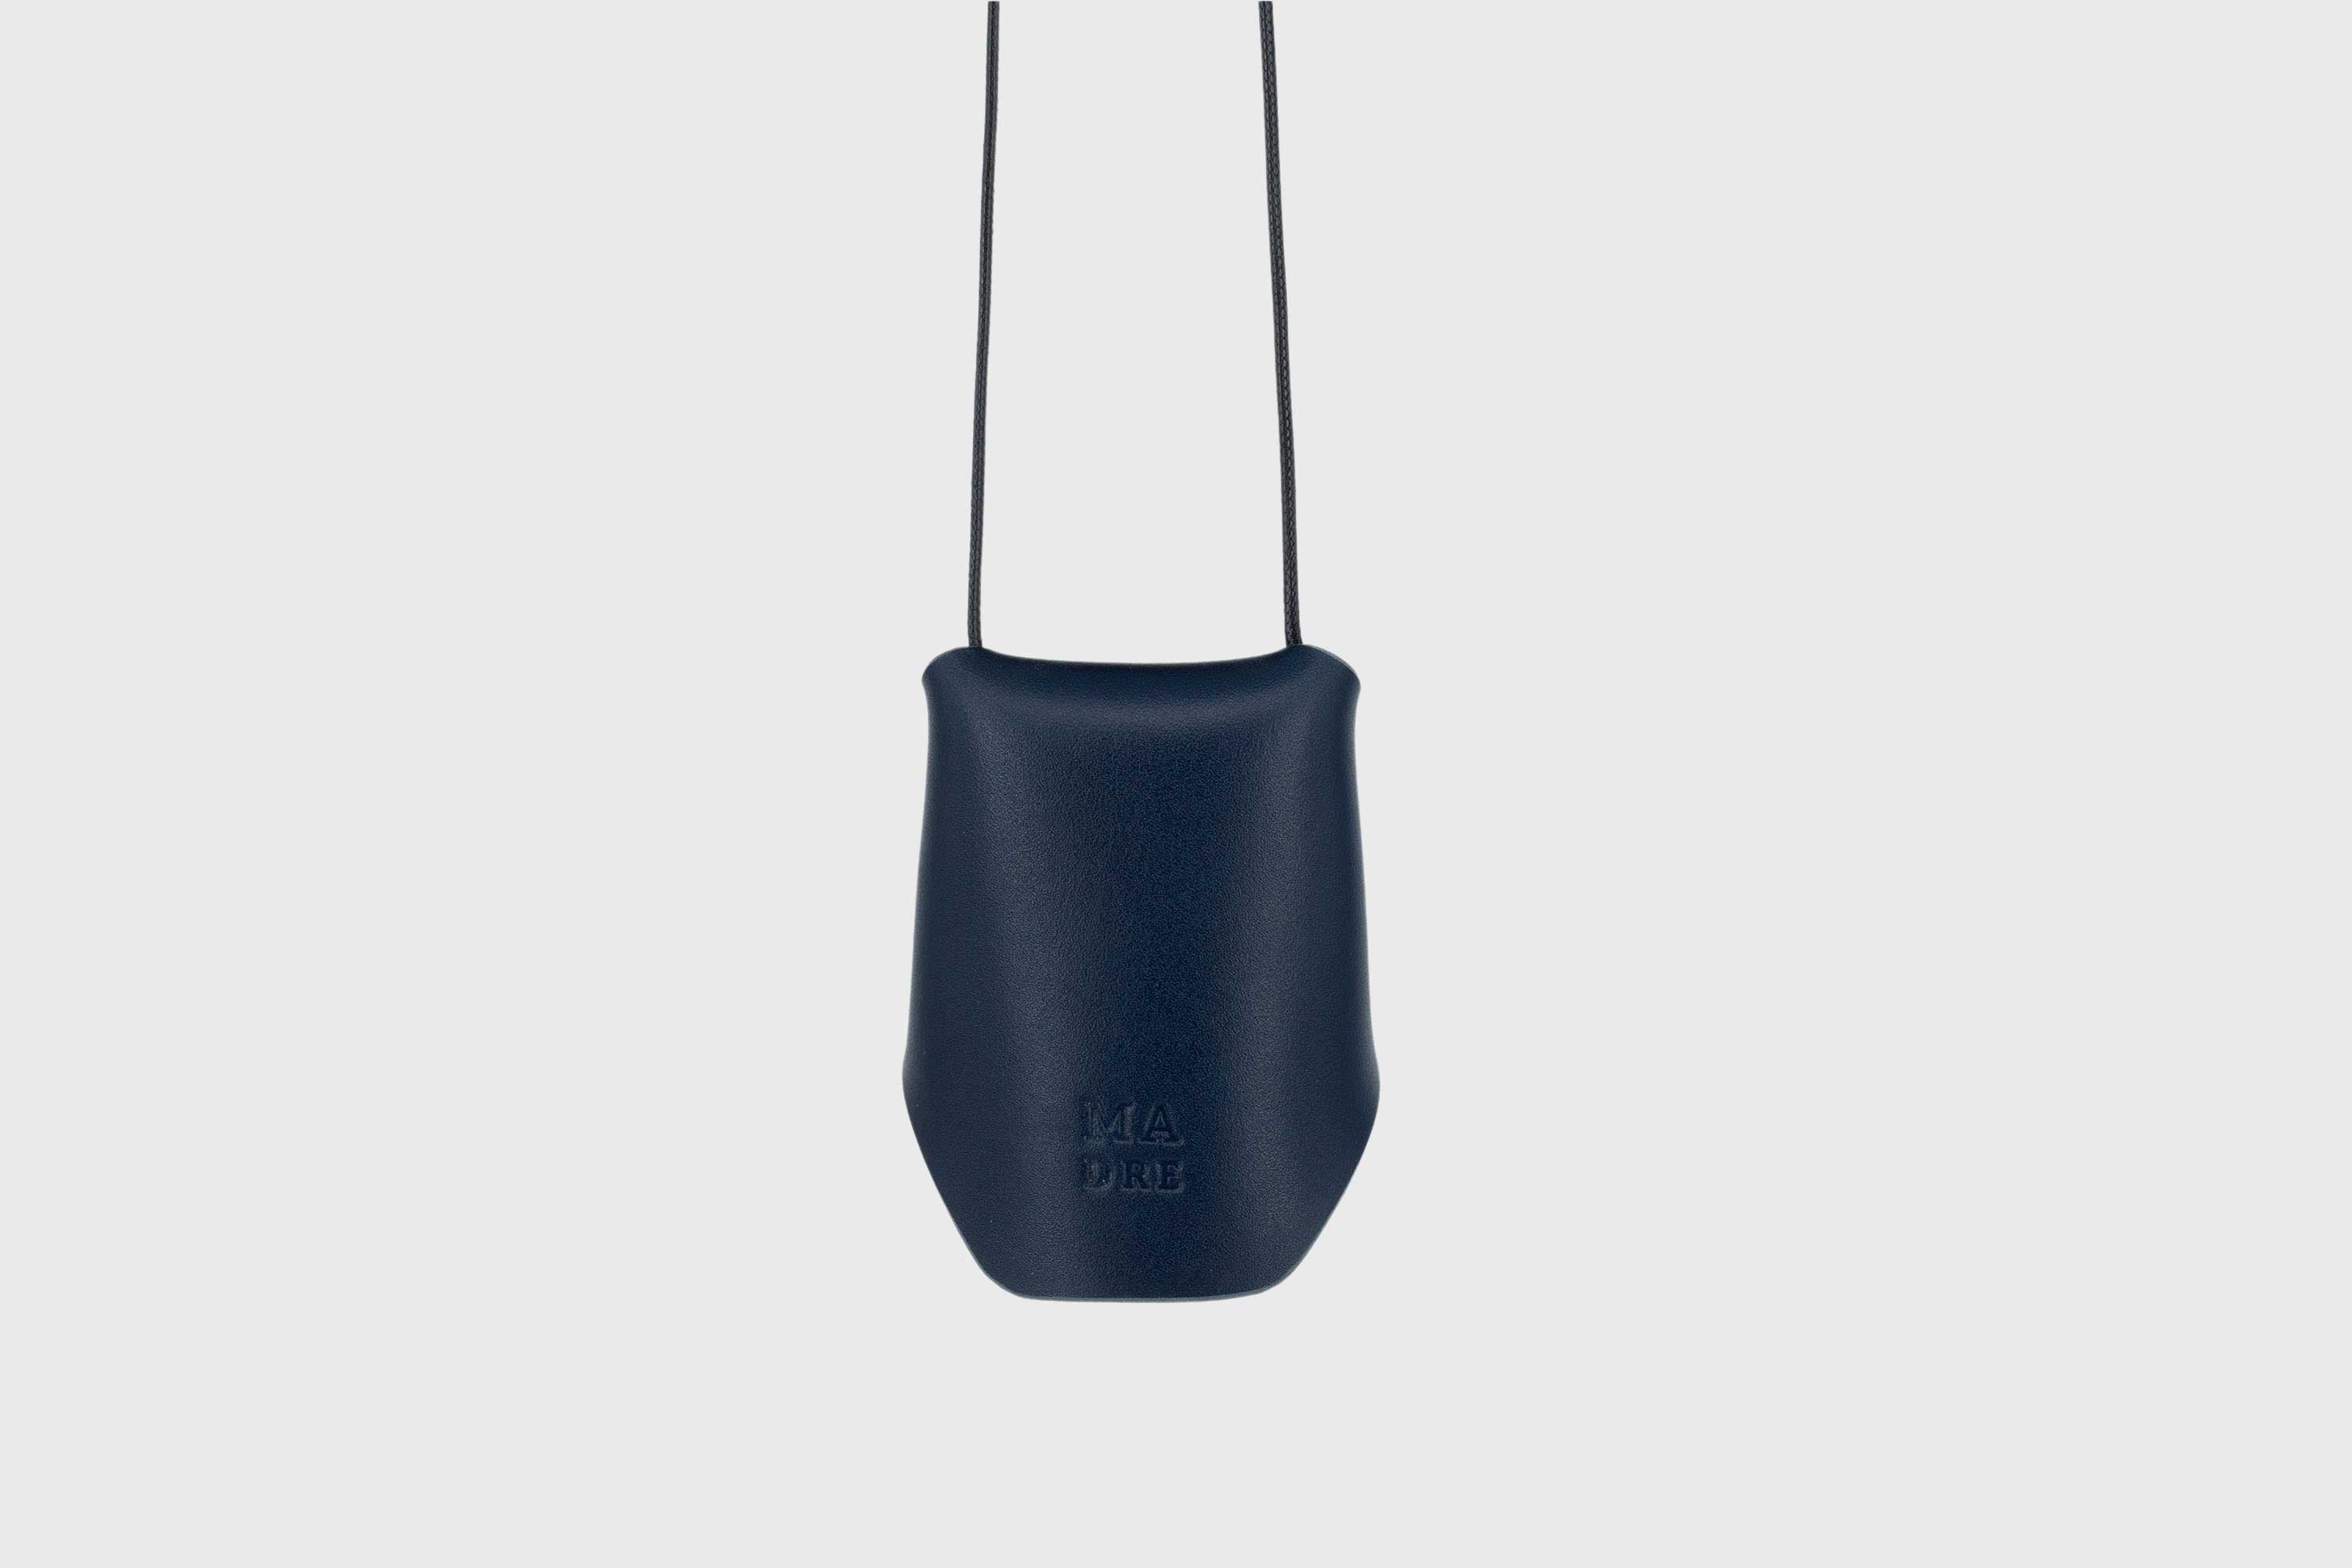 Keyhanger marine blue color pouch leather clochette made out of vegetable tanned leather designed by atelier madre manuel dreesmann barcelona